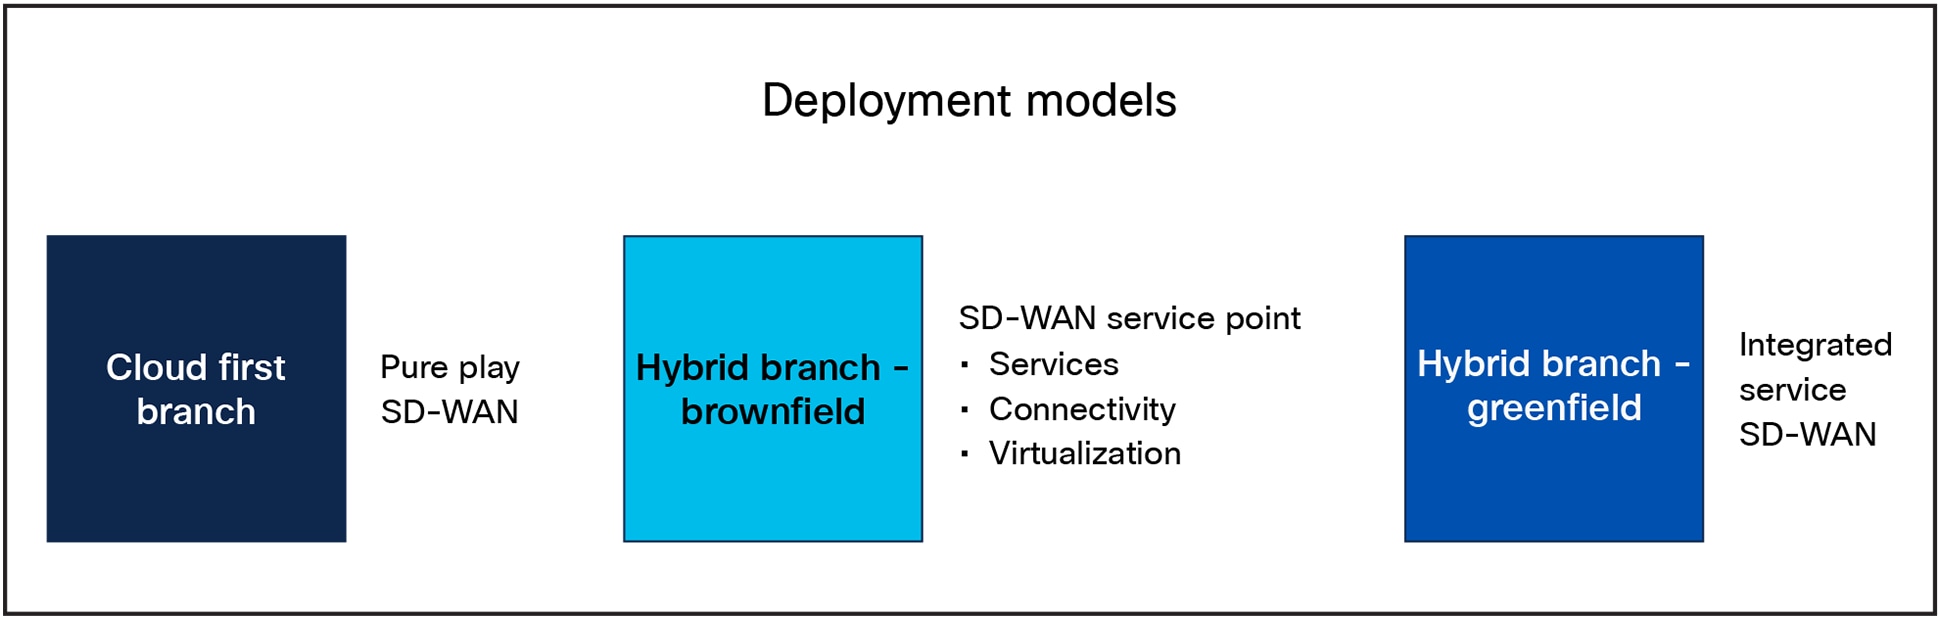 SD-WAN performance challenges